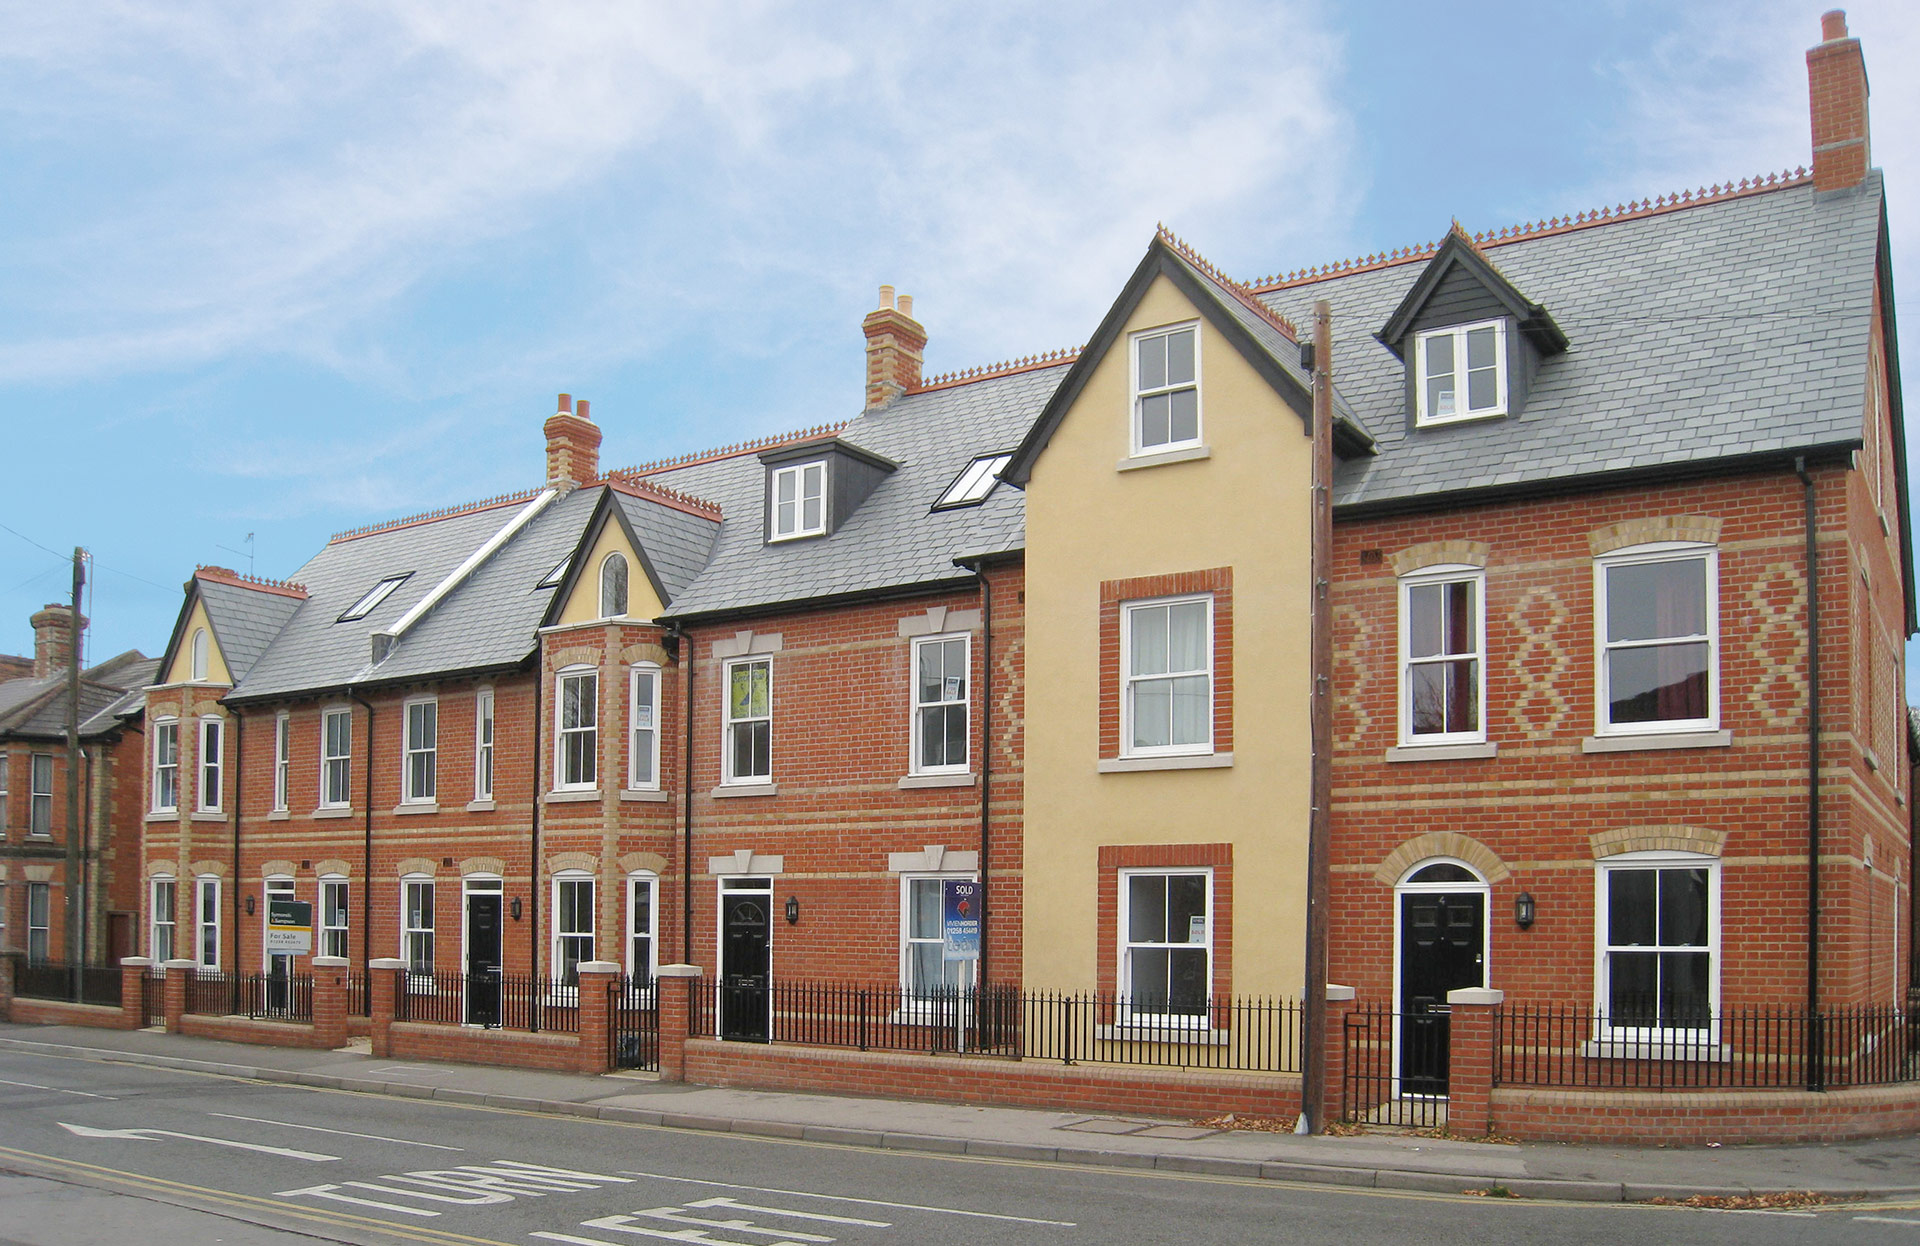 Attractive brick townhouses from road